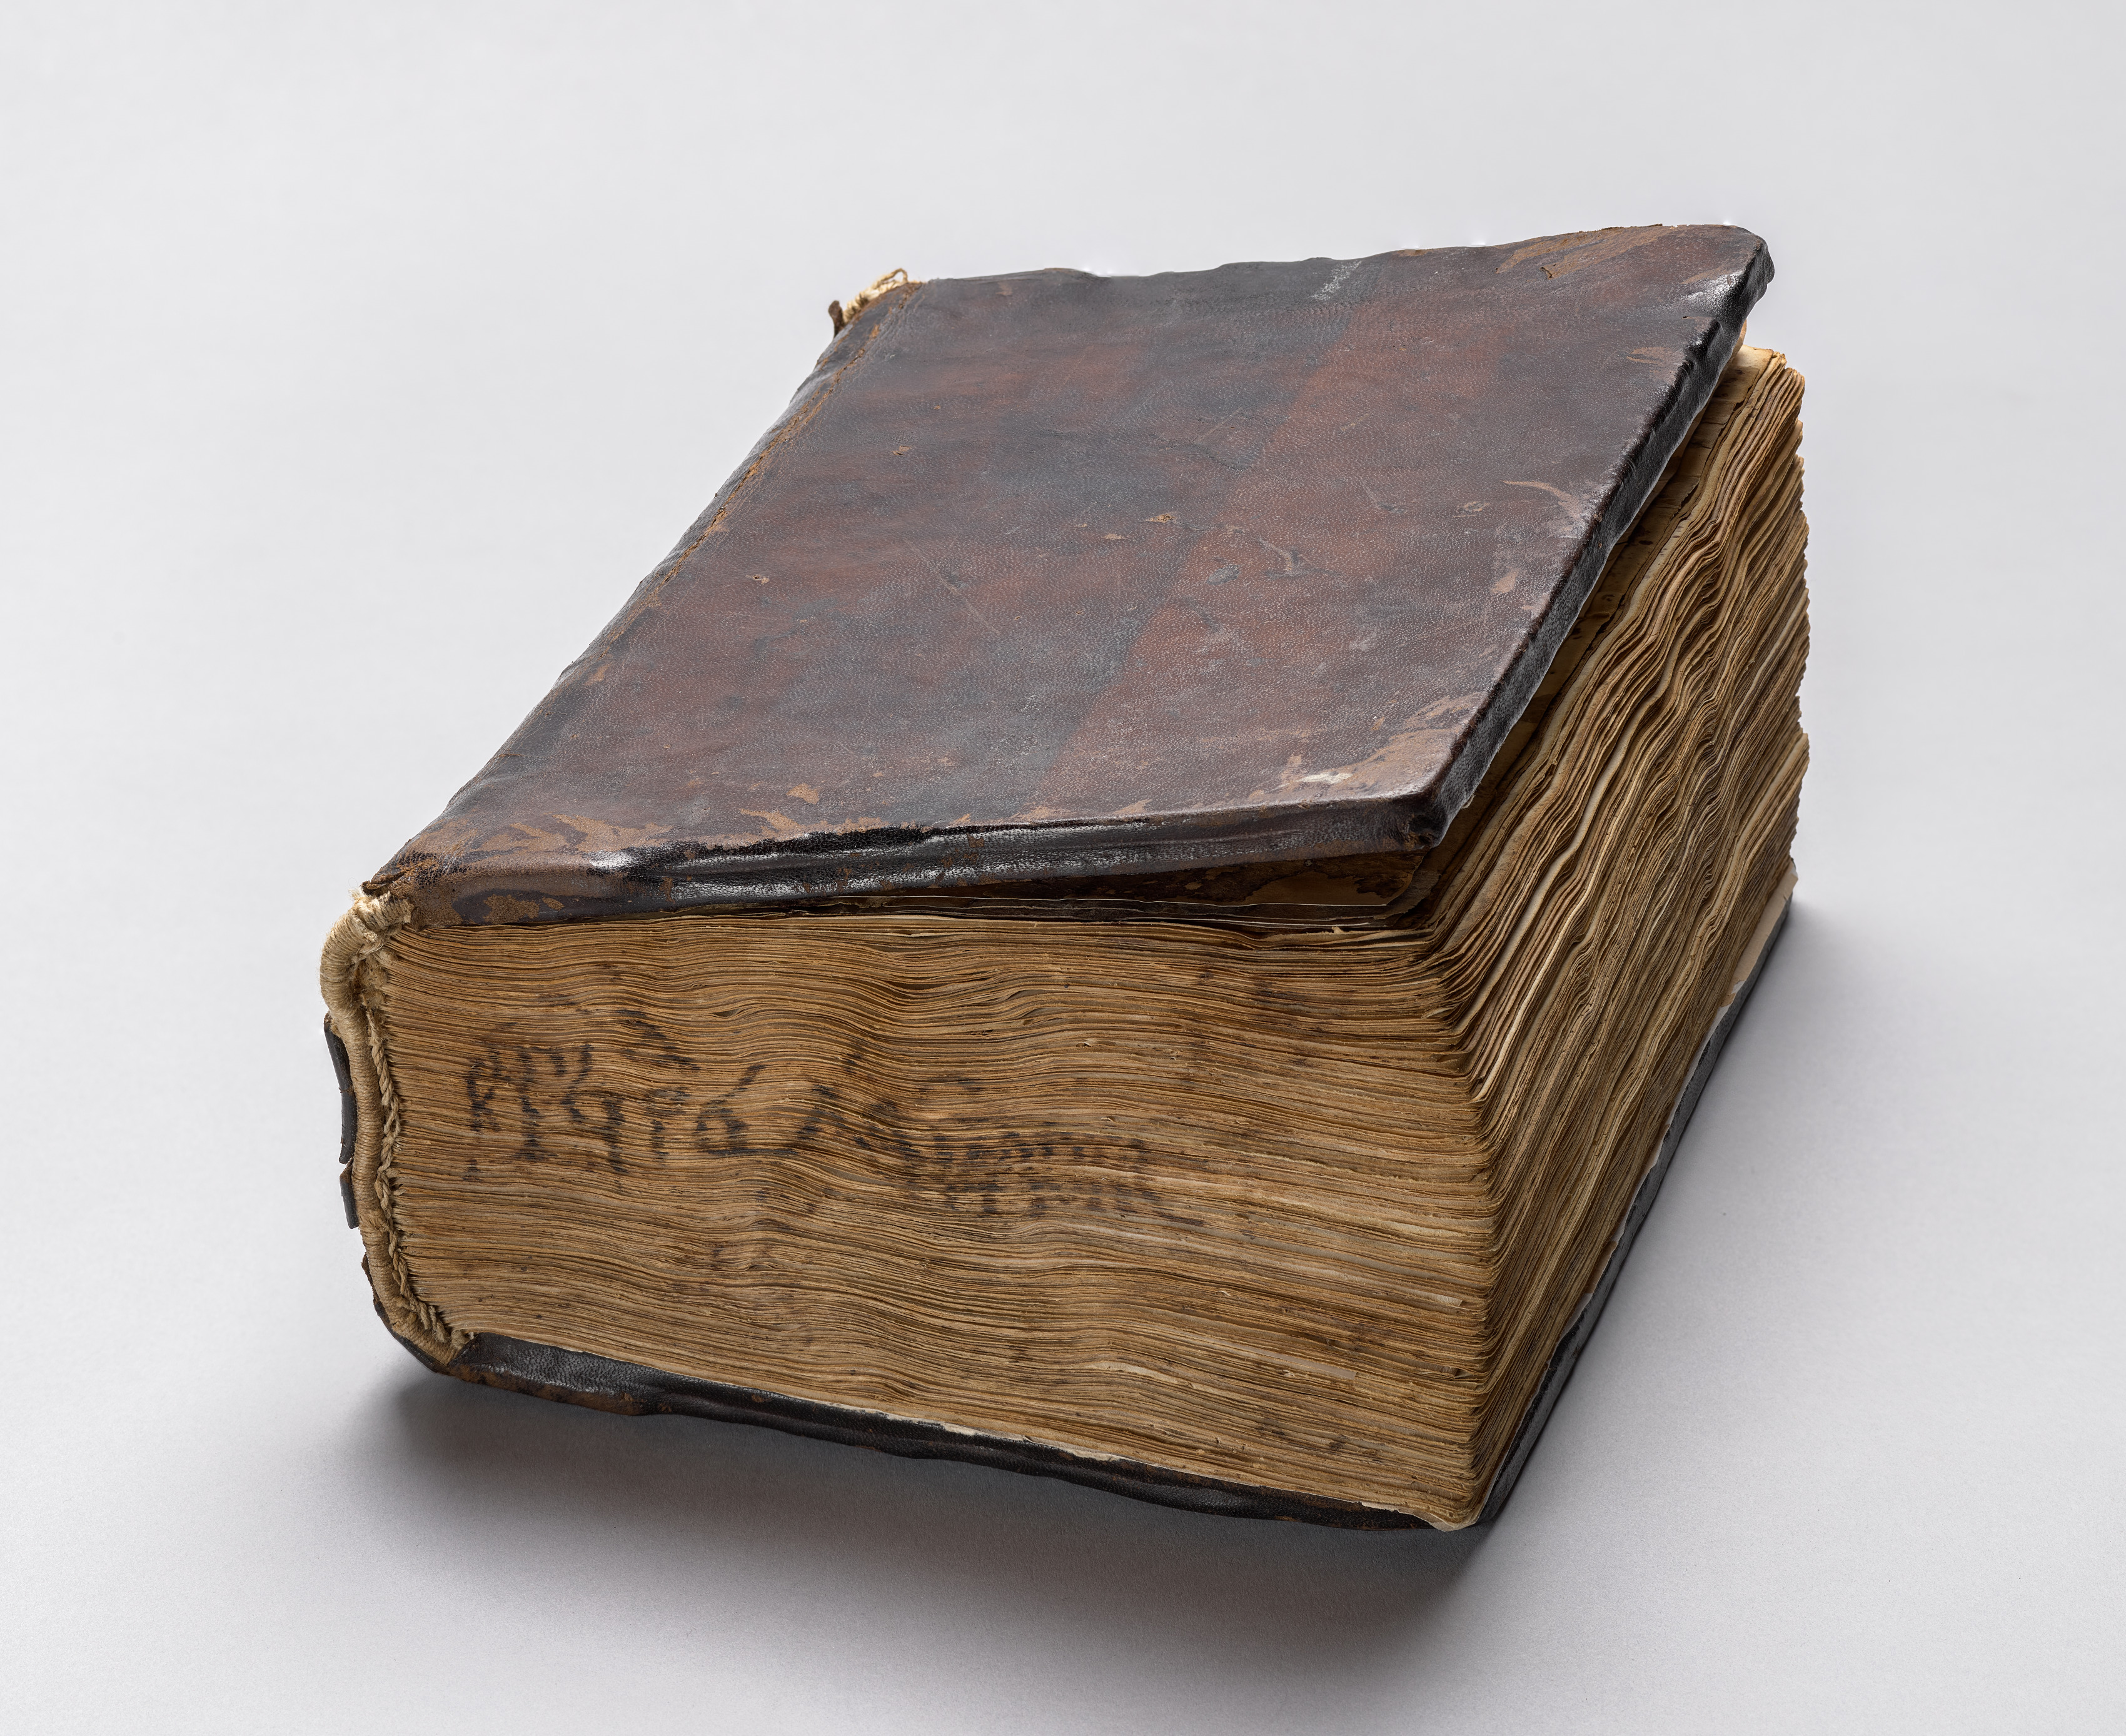 Gospel Book with Commentaries